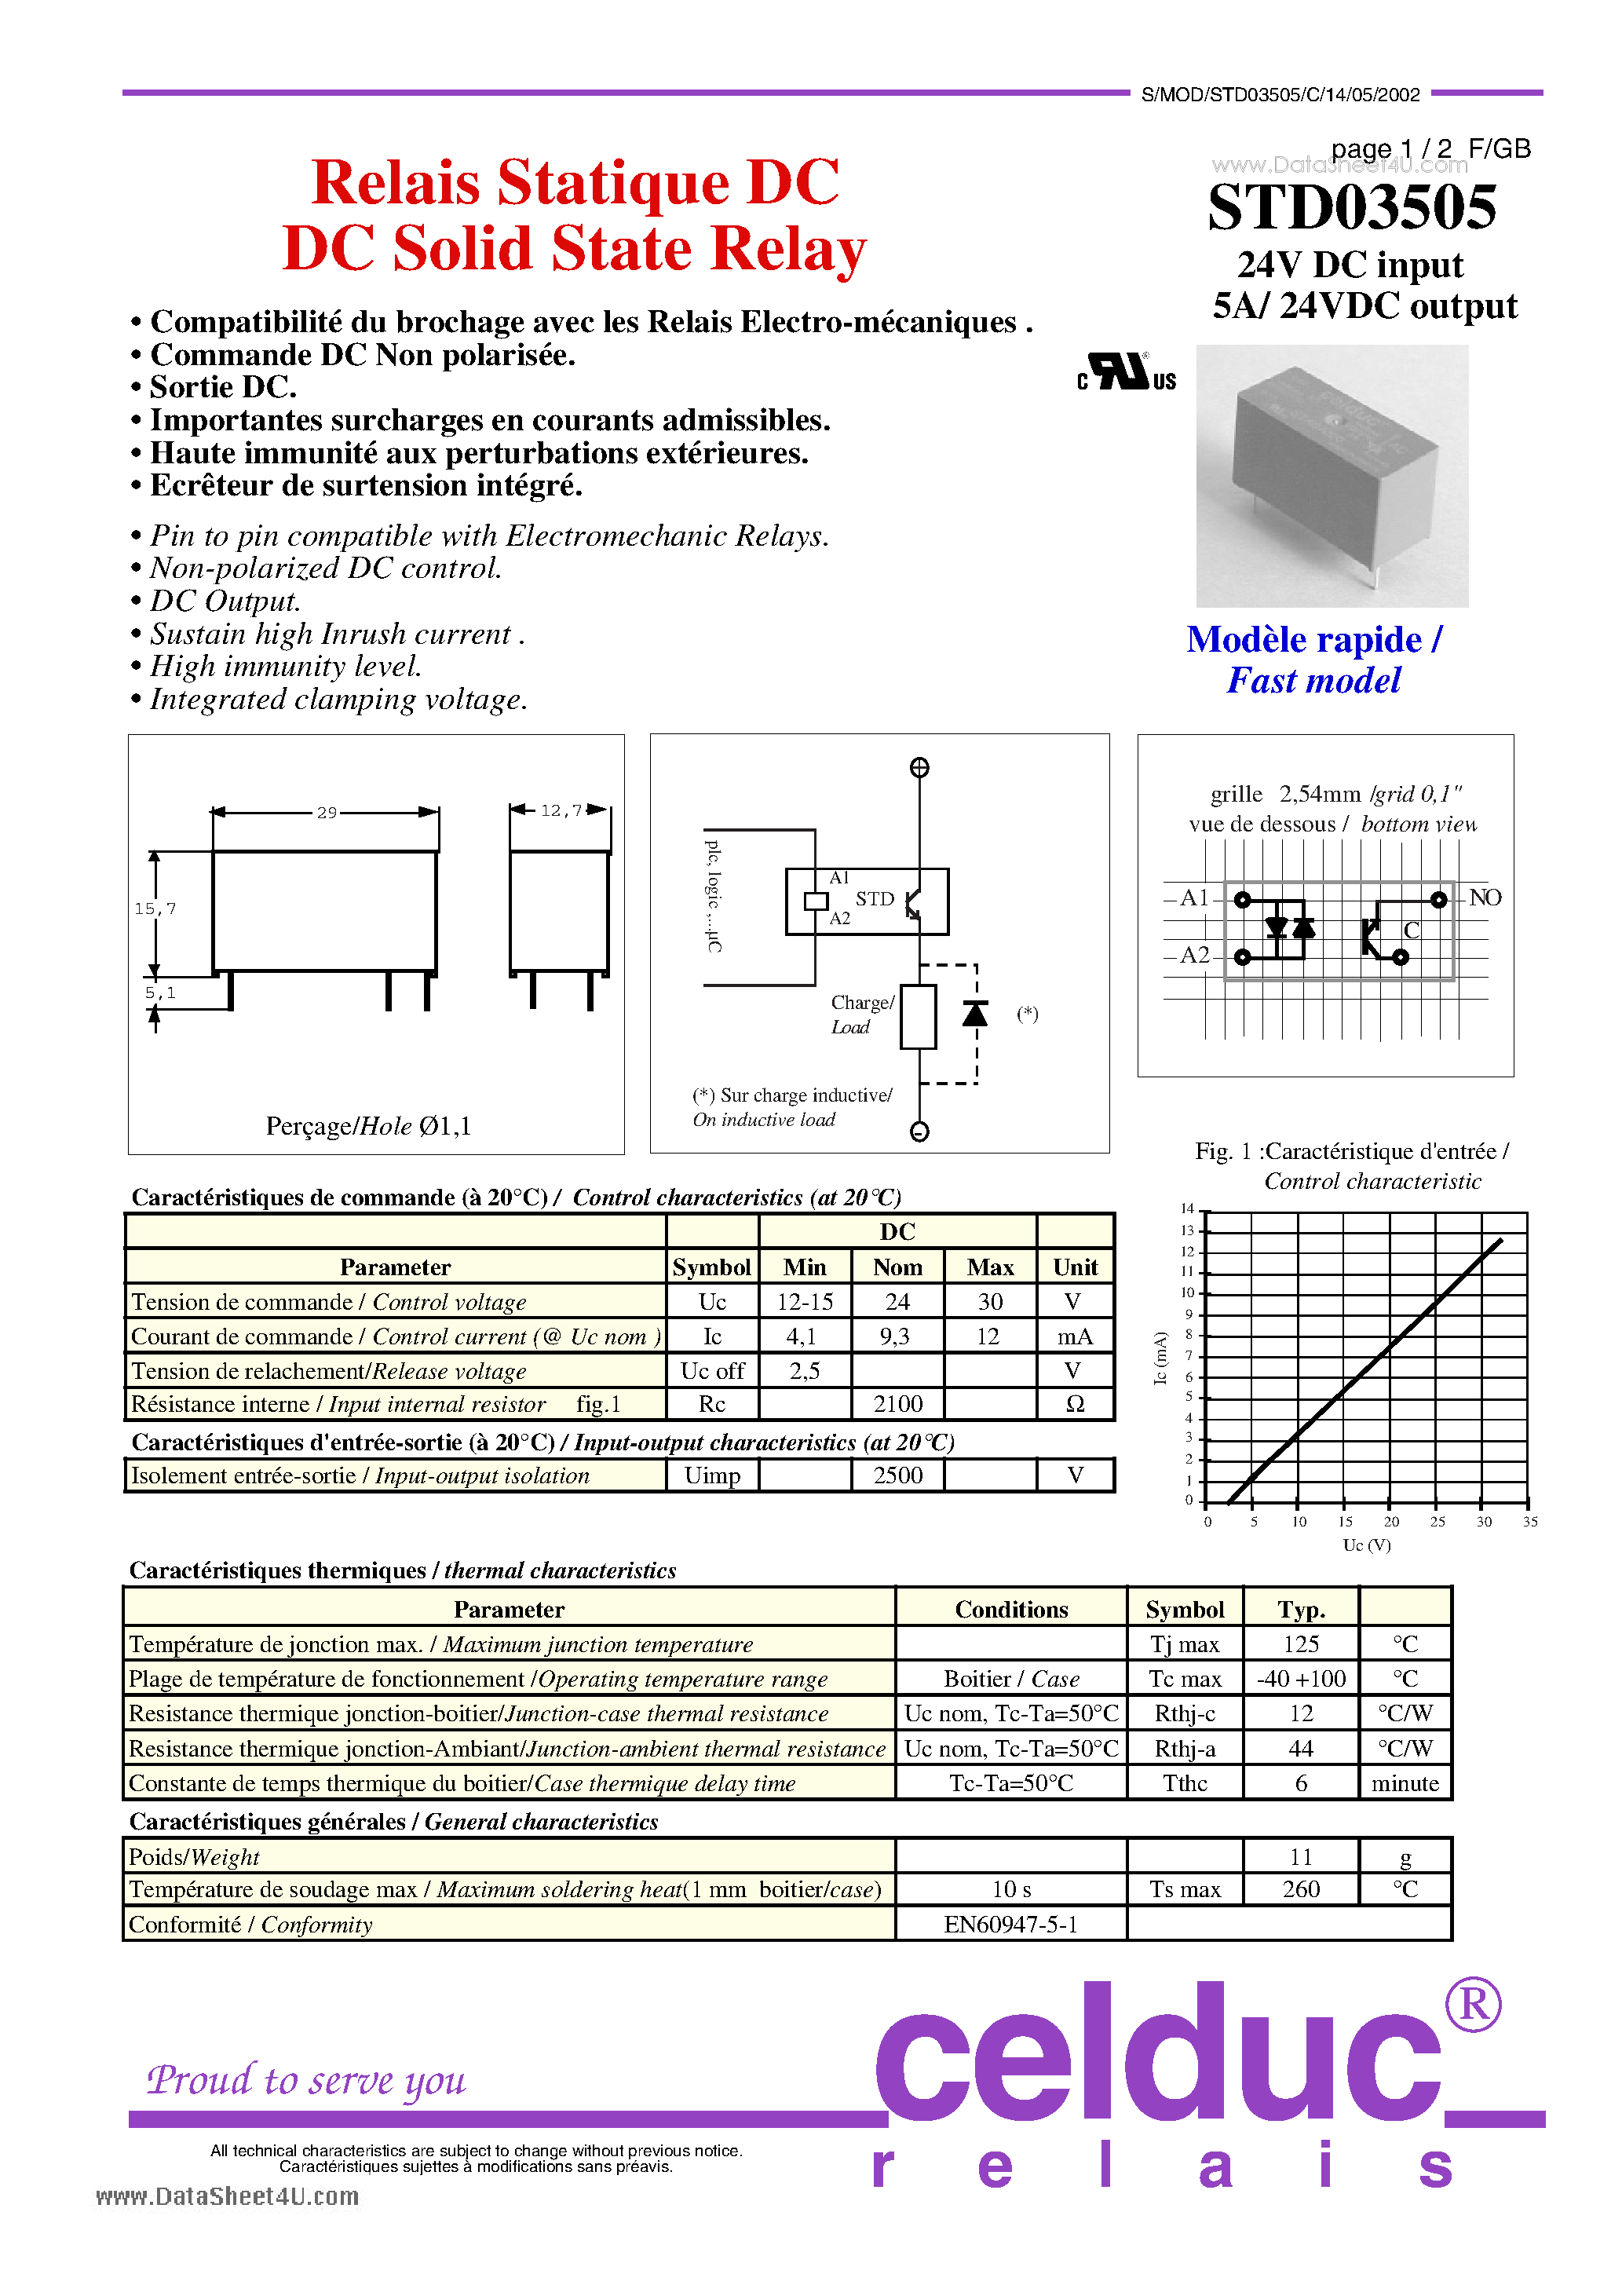 Даташит STD03505 - DC Solid State Relay страница 1